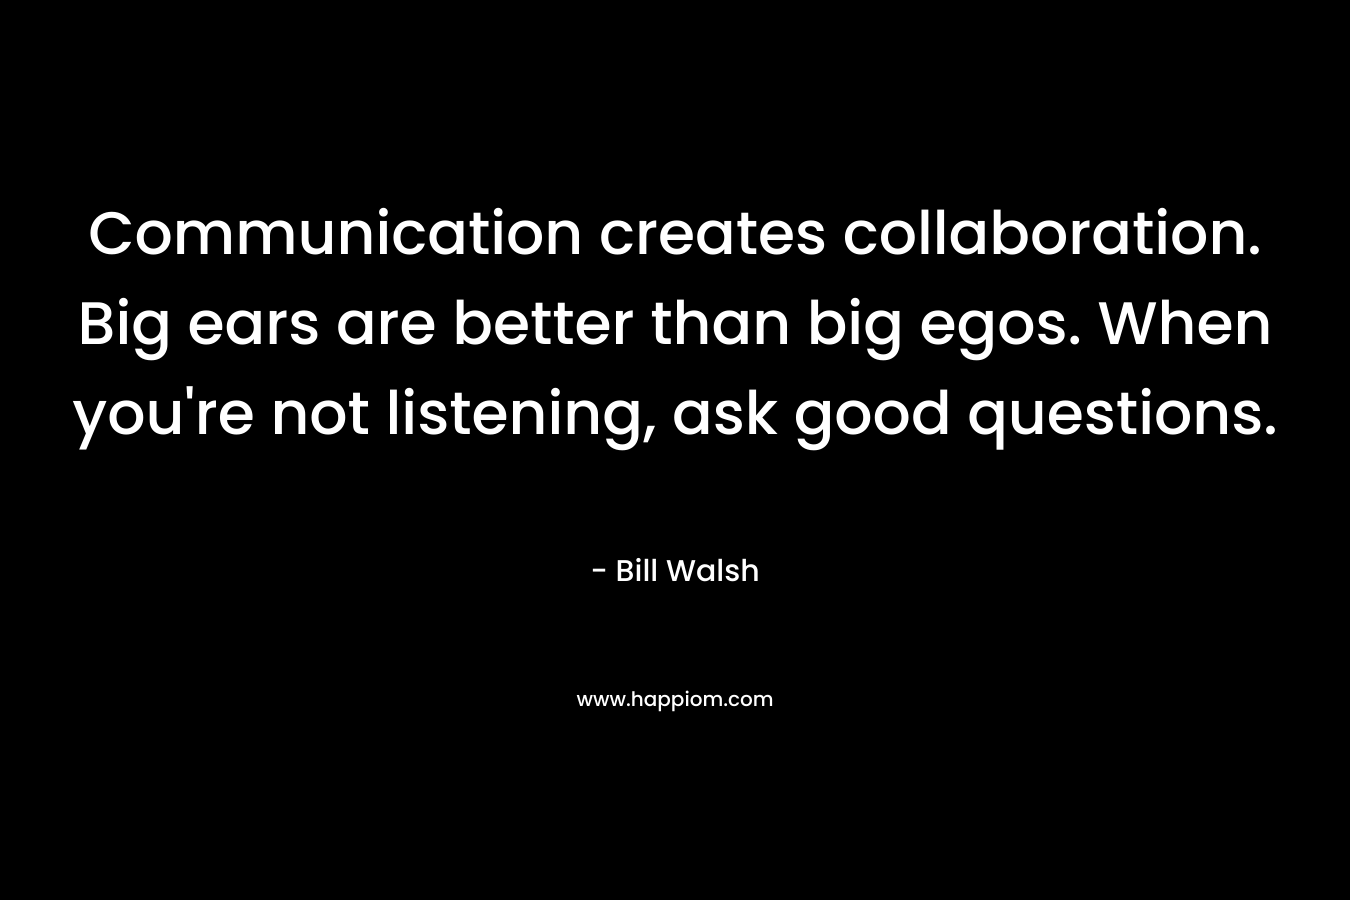 Communication creates collaboration. Big ears are better than big egos. When you're not listening, ask good questions.